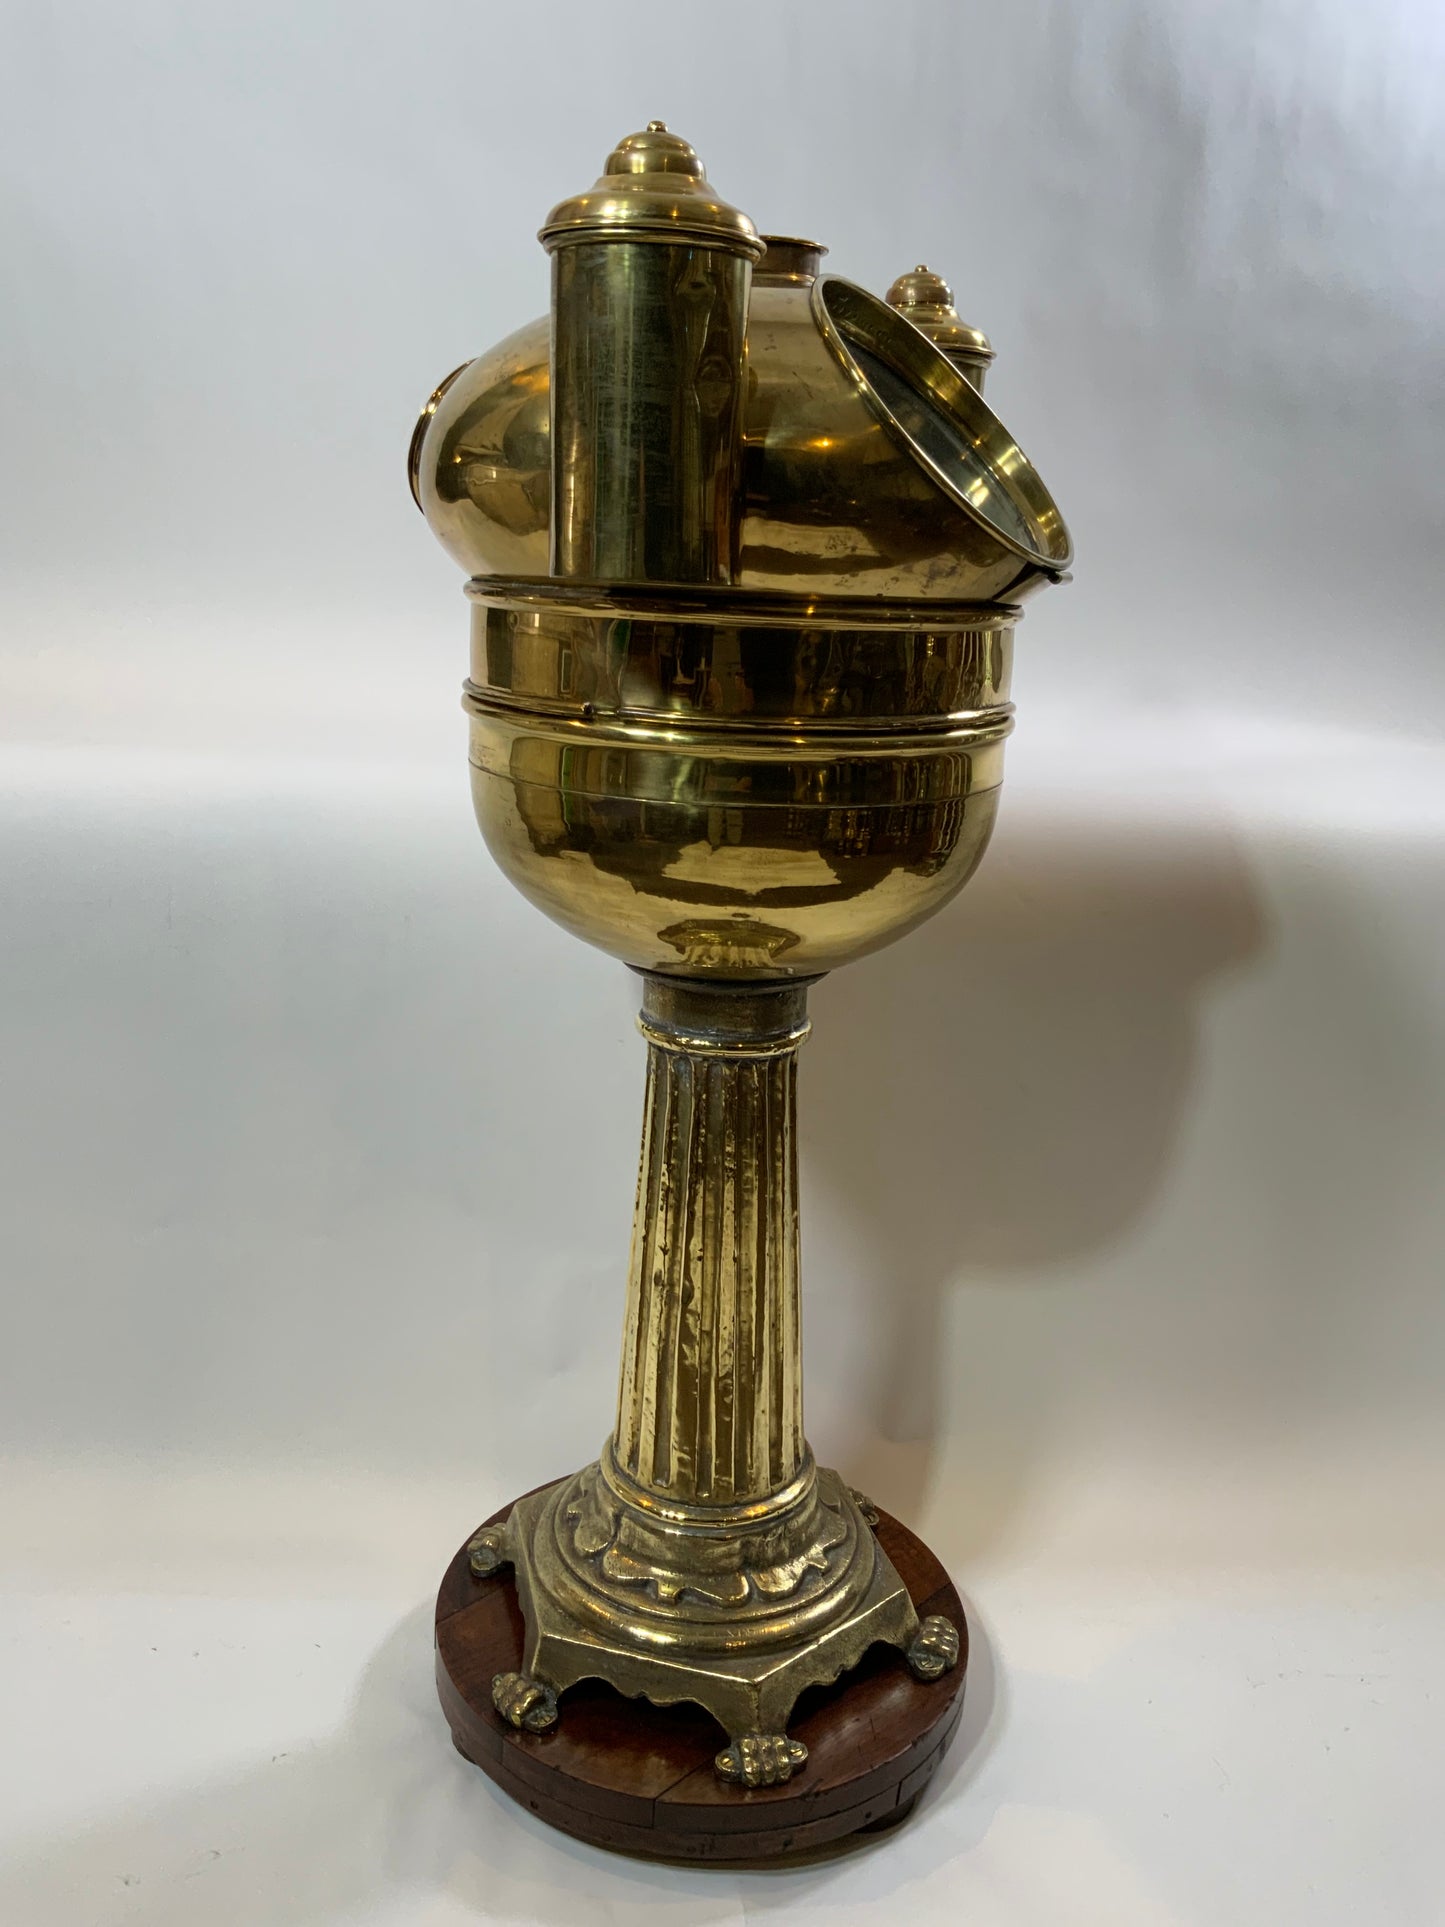 Yacht Binnacle from Italy Circa 1880 with Dry Card Compass - Lannan Gallery